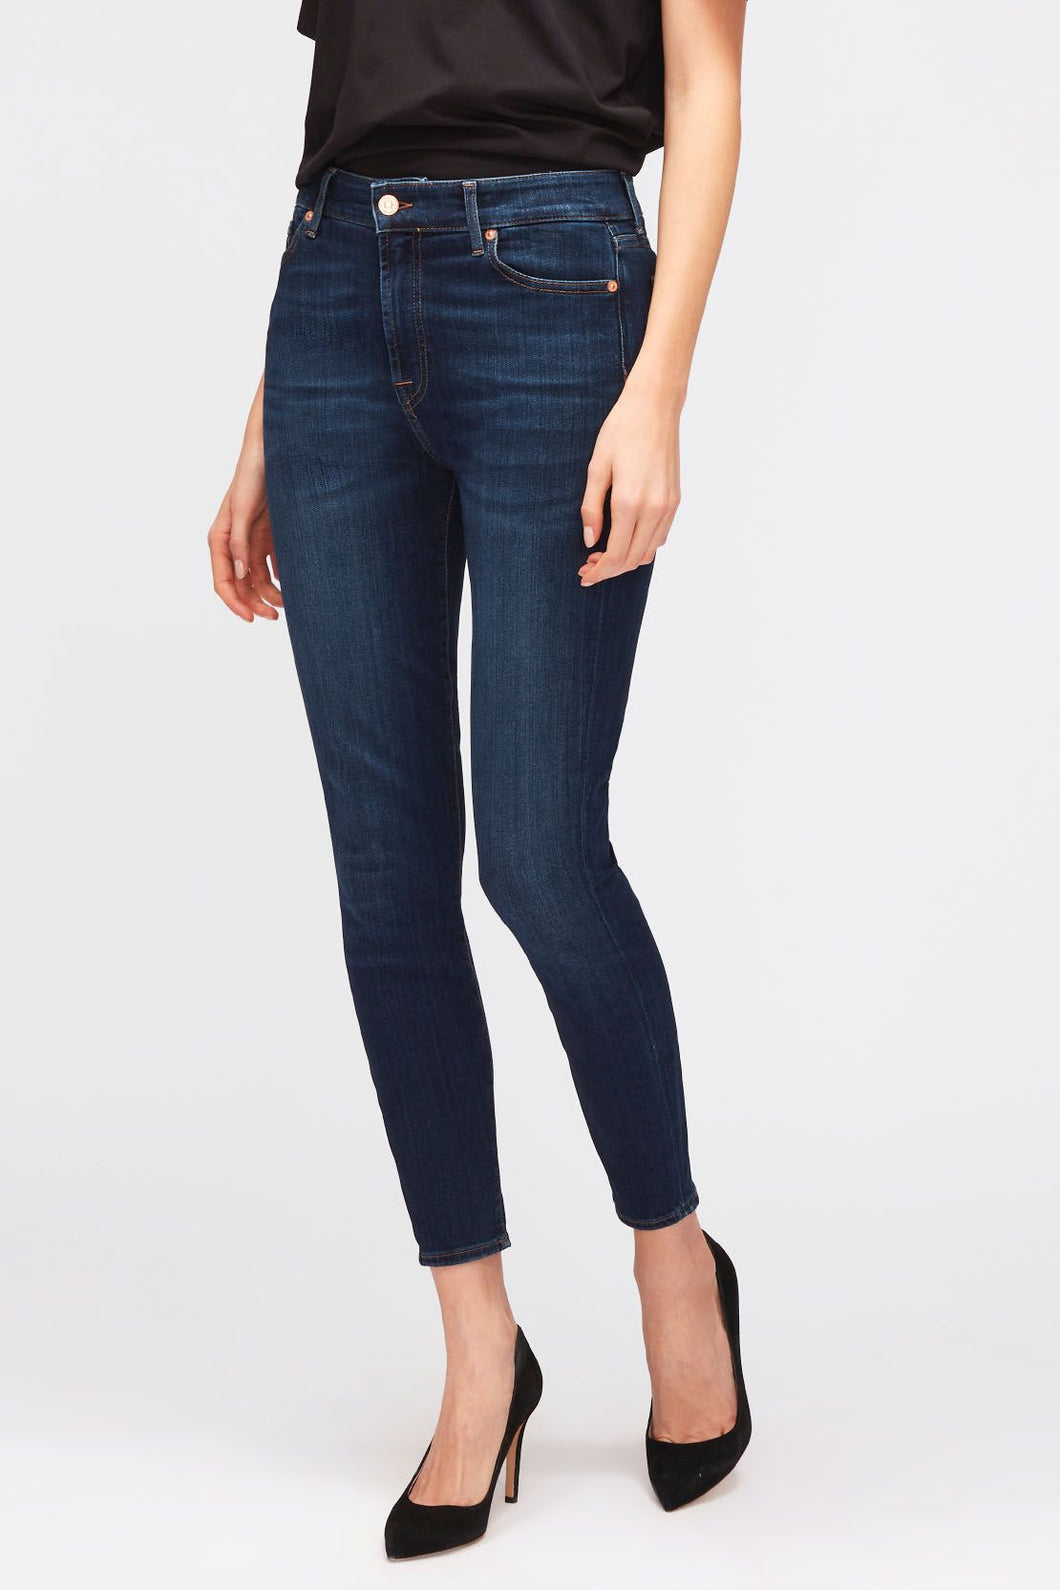 For All Mankind - Aubrey Slim Illusion Luxe Starlight Jeans